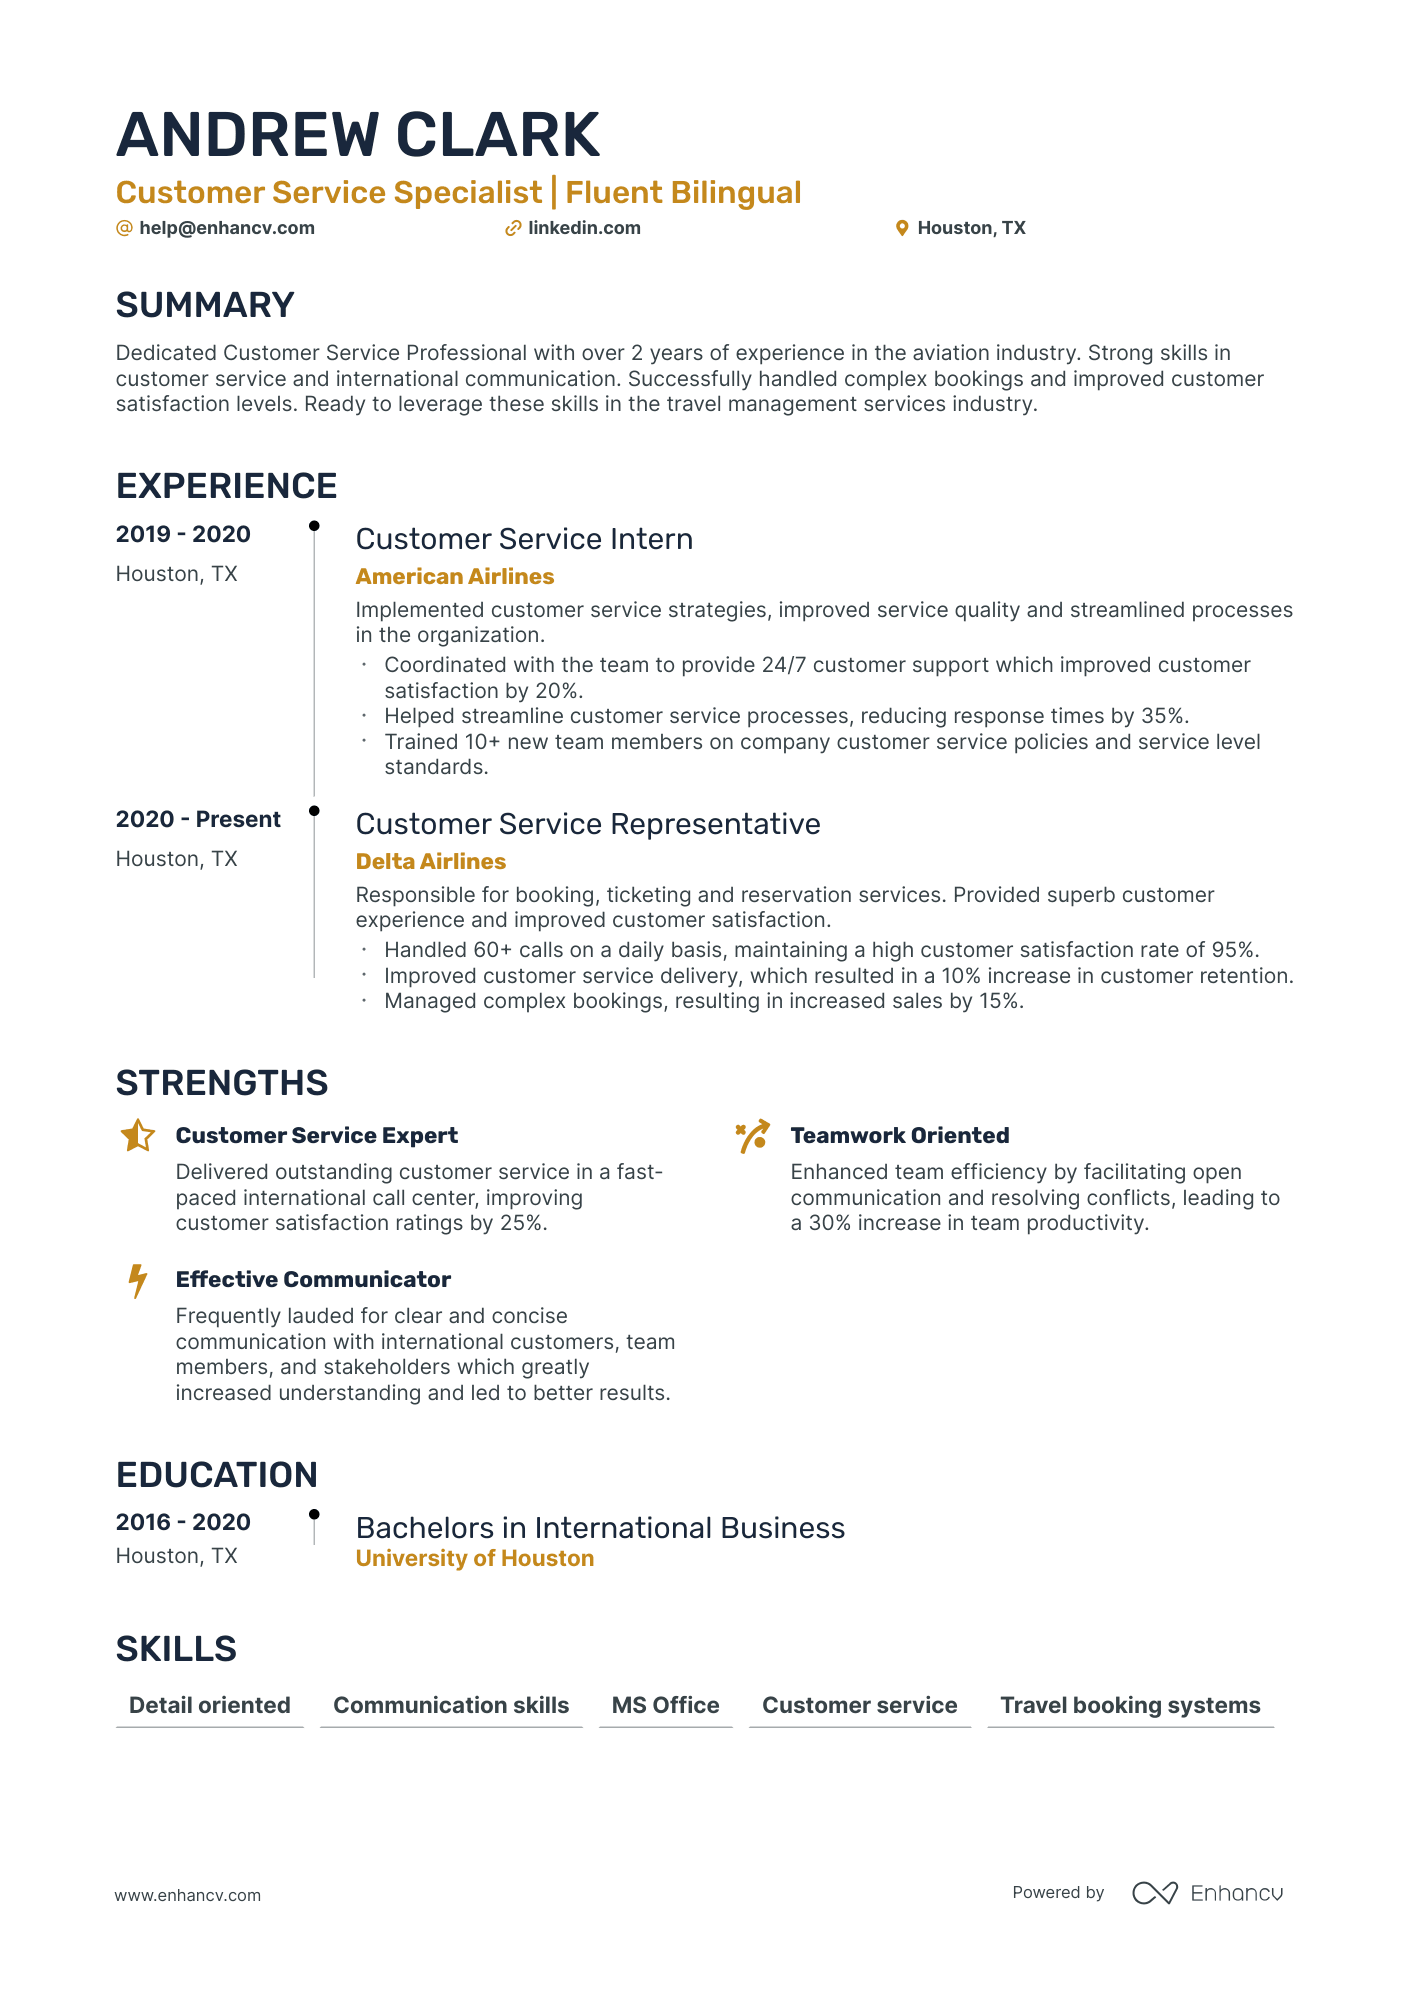 summary for customer service resume with no experience